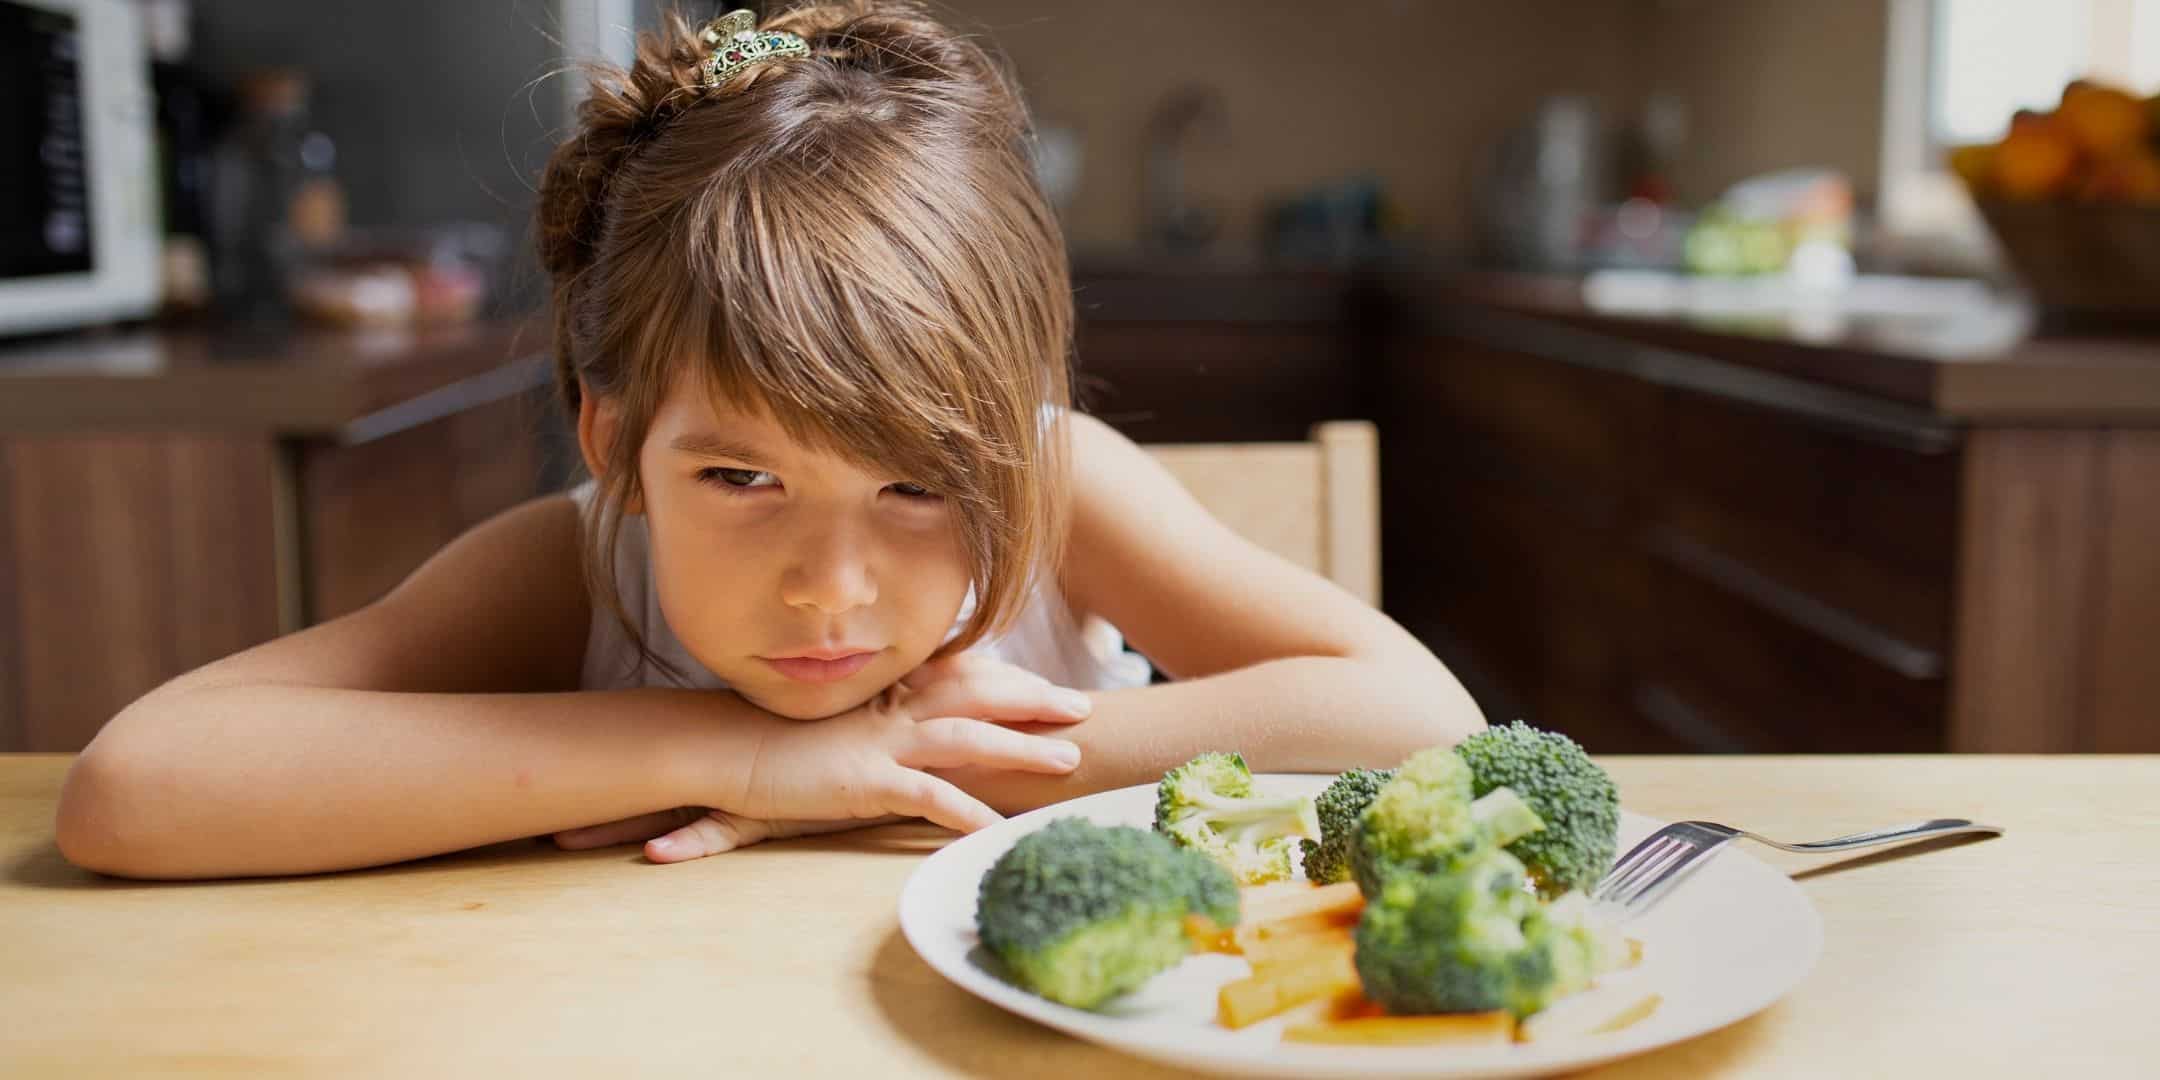 picky eater staring at plate of food untouched